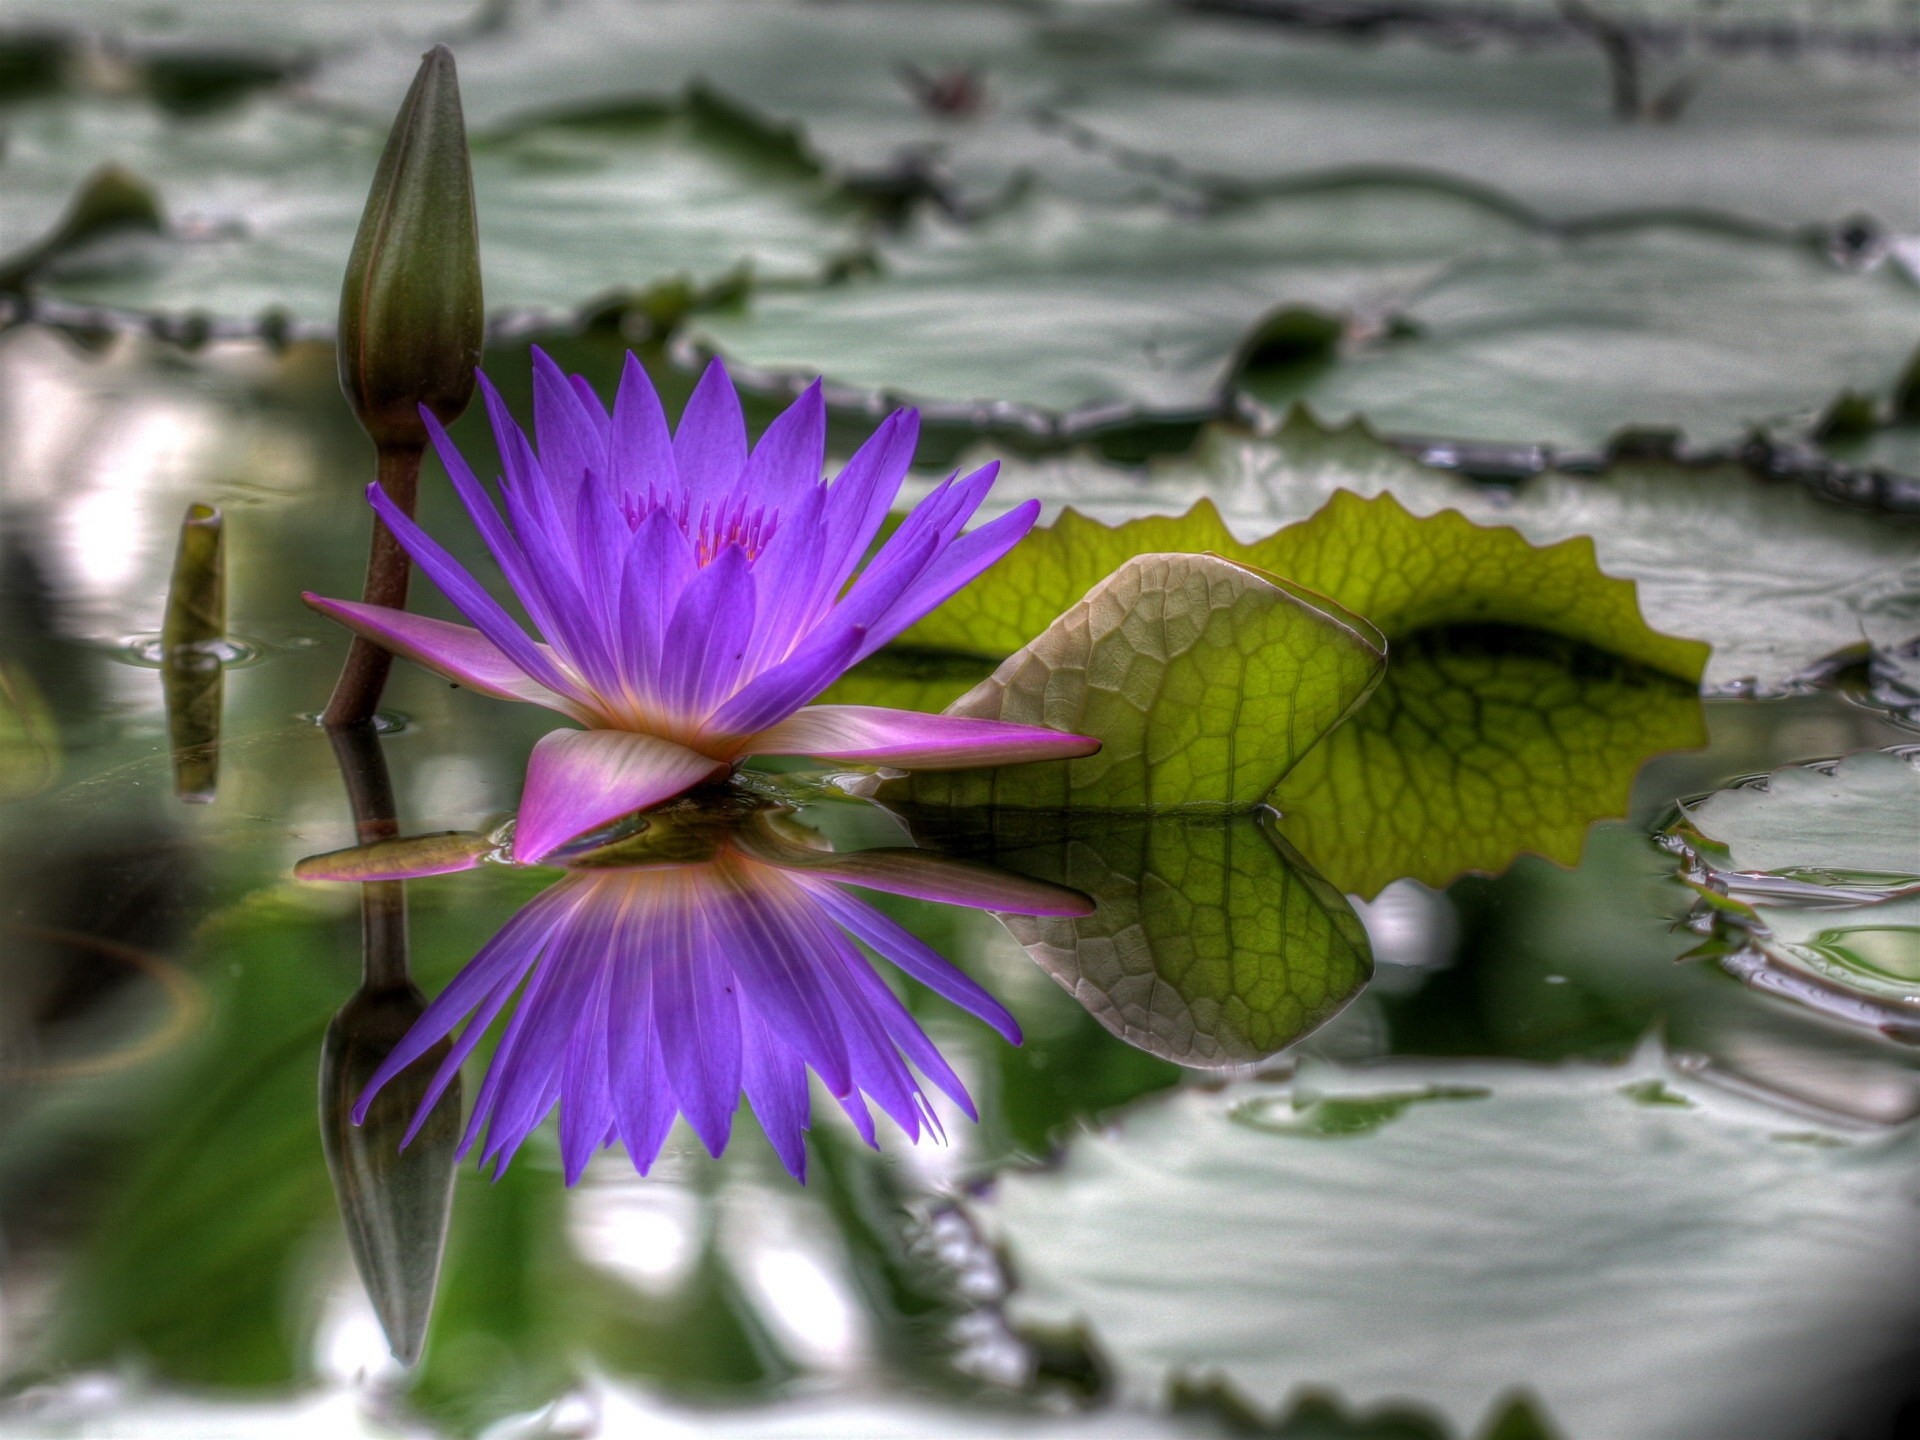 flowers, water, leaves, bud, loose, water lily, dissolved